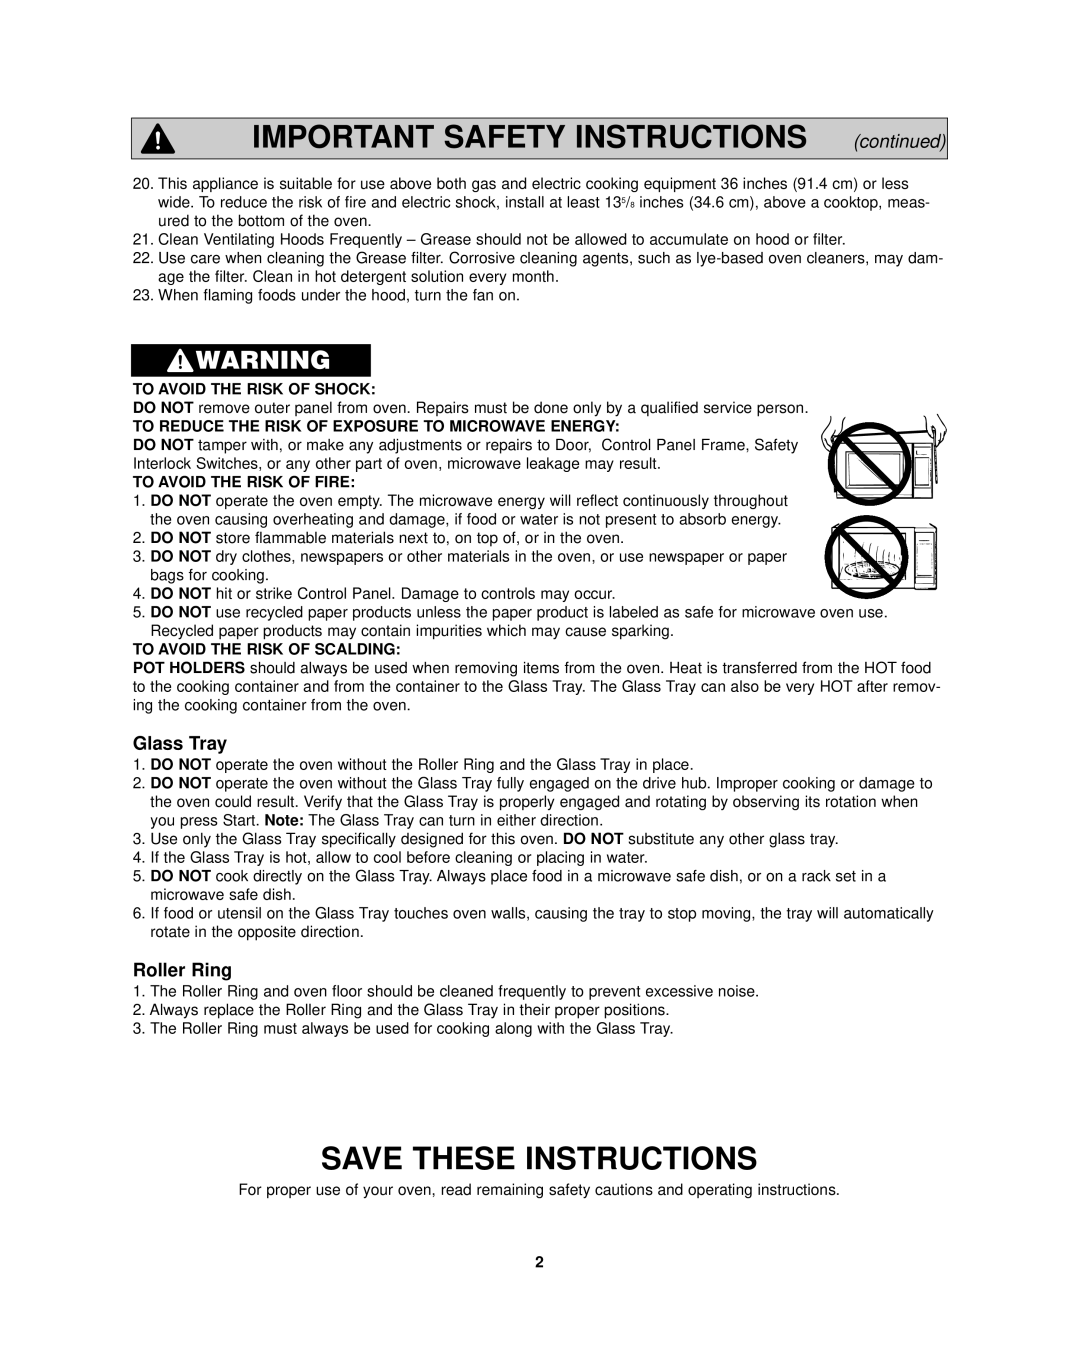 Panasonic NN-SD297SR IMPORTANT SAFETY INSTRUCTIONS continued, Save These Instructions, Glass Tray, Roller Ring 